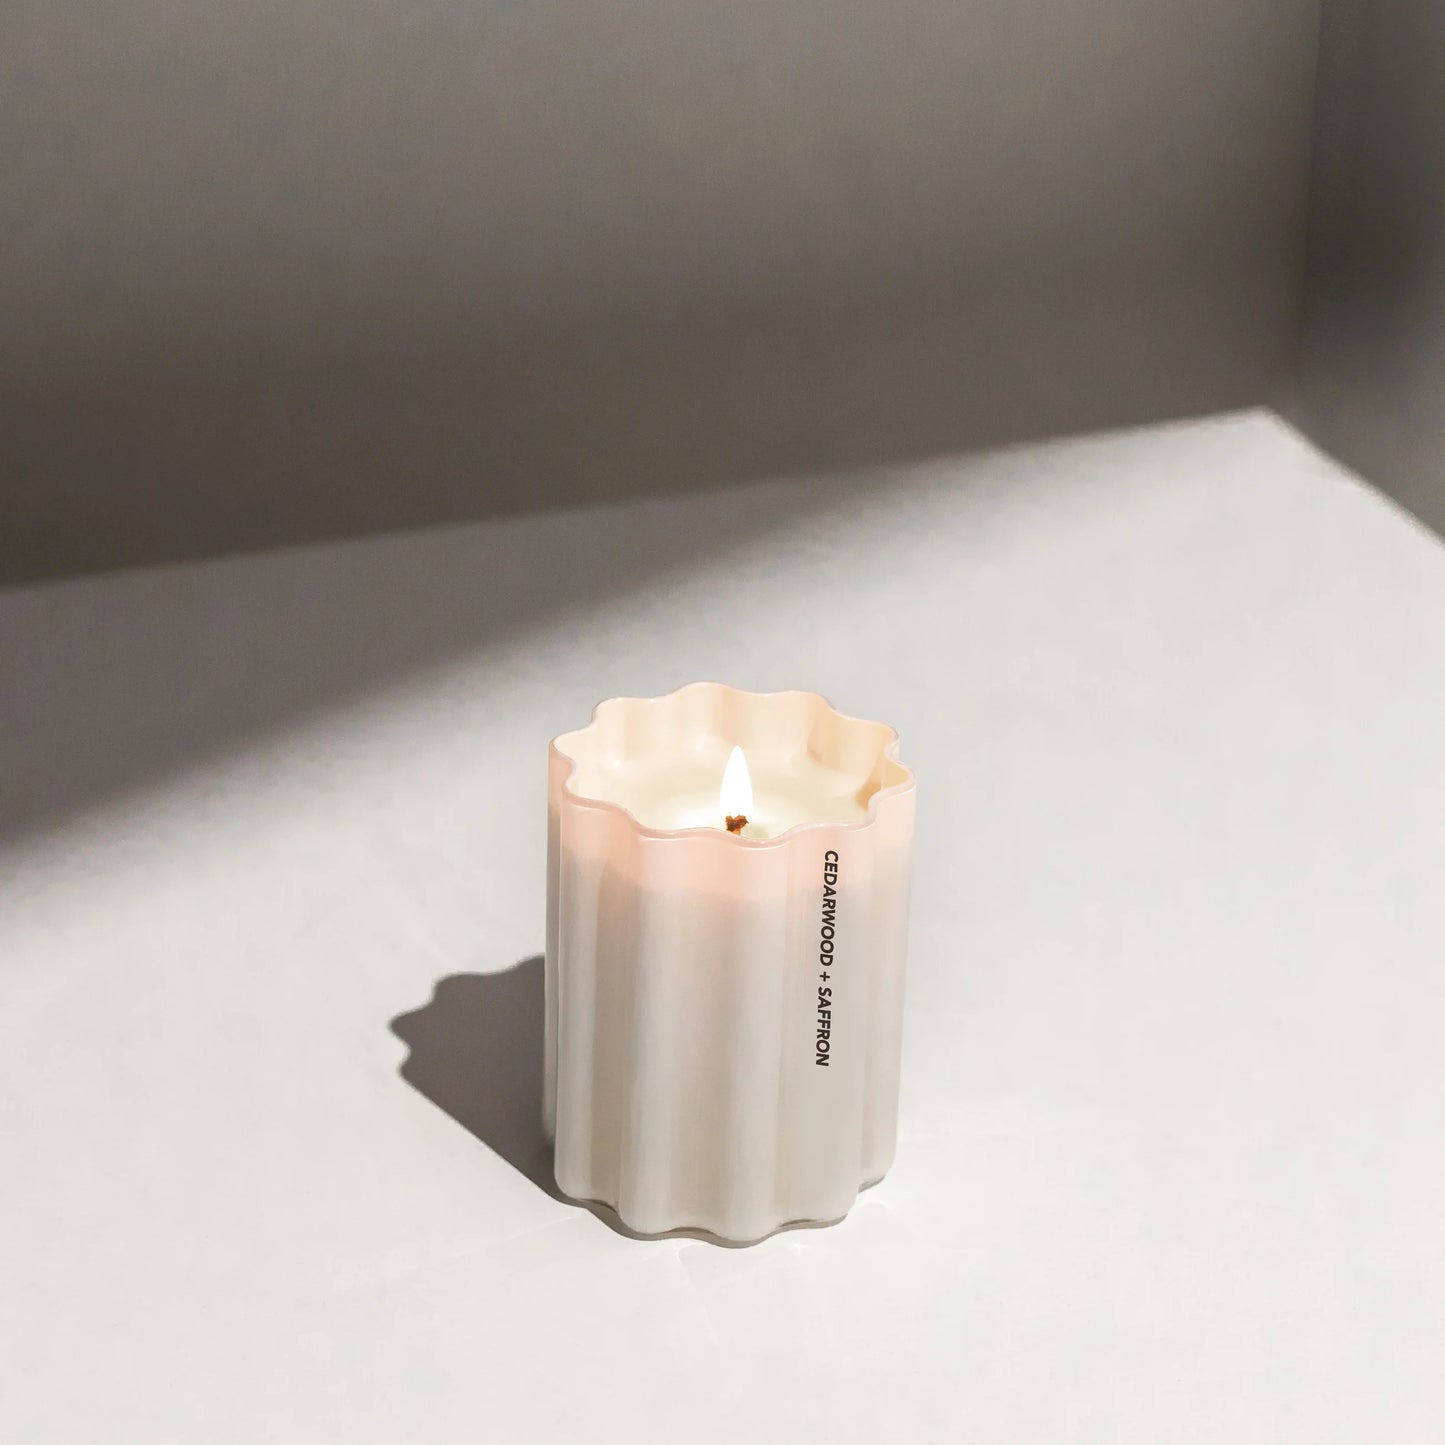 Wave Candle